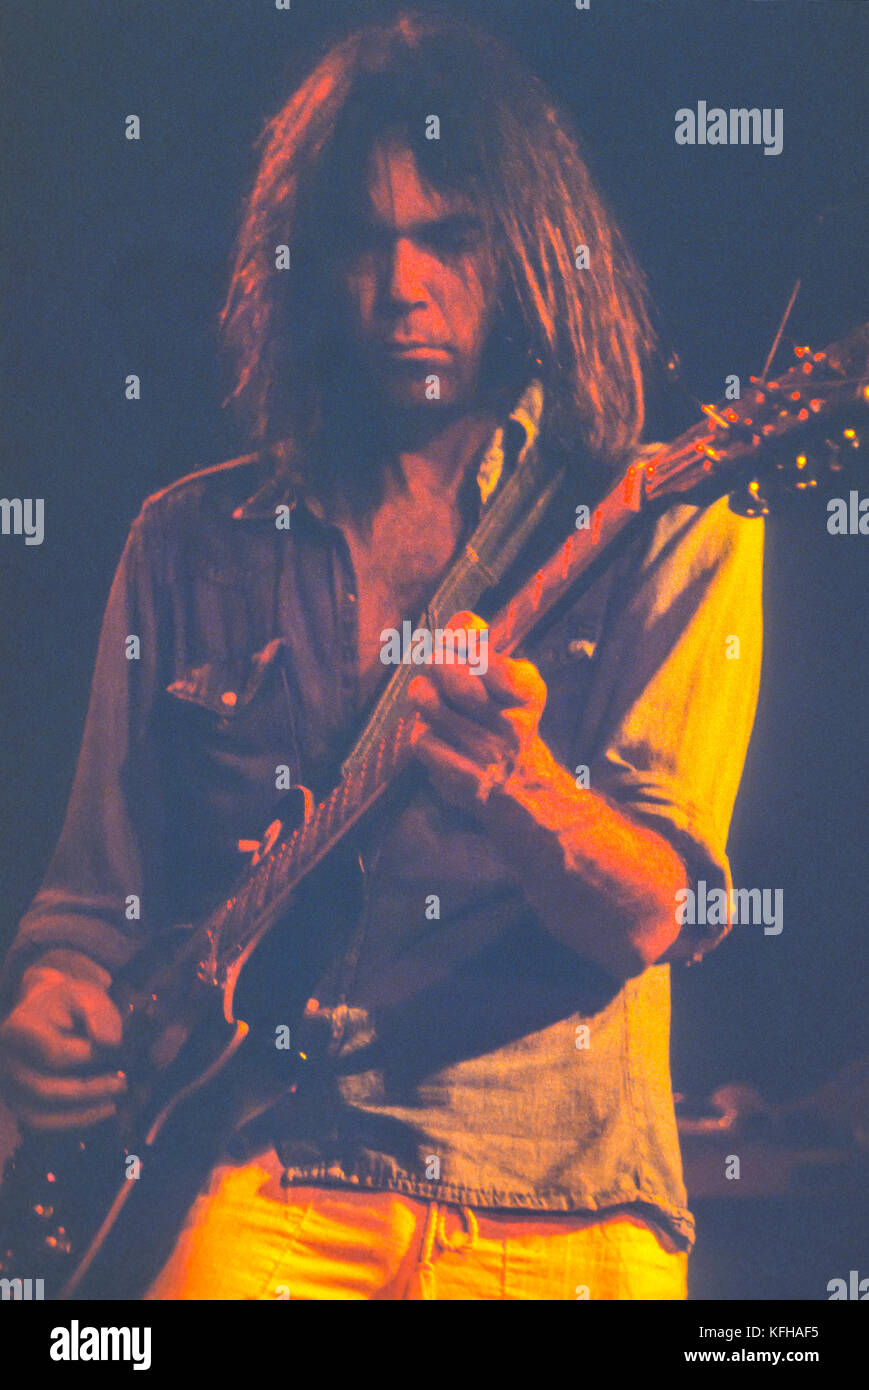 SANTA CRUZ, CALIFORNIA, USA - Musician Neil Young performs with The Ducks, at The Catalyst night club. August 1977 Stock Photo